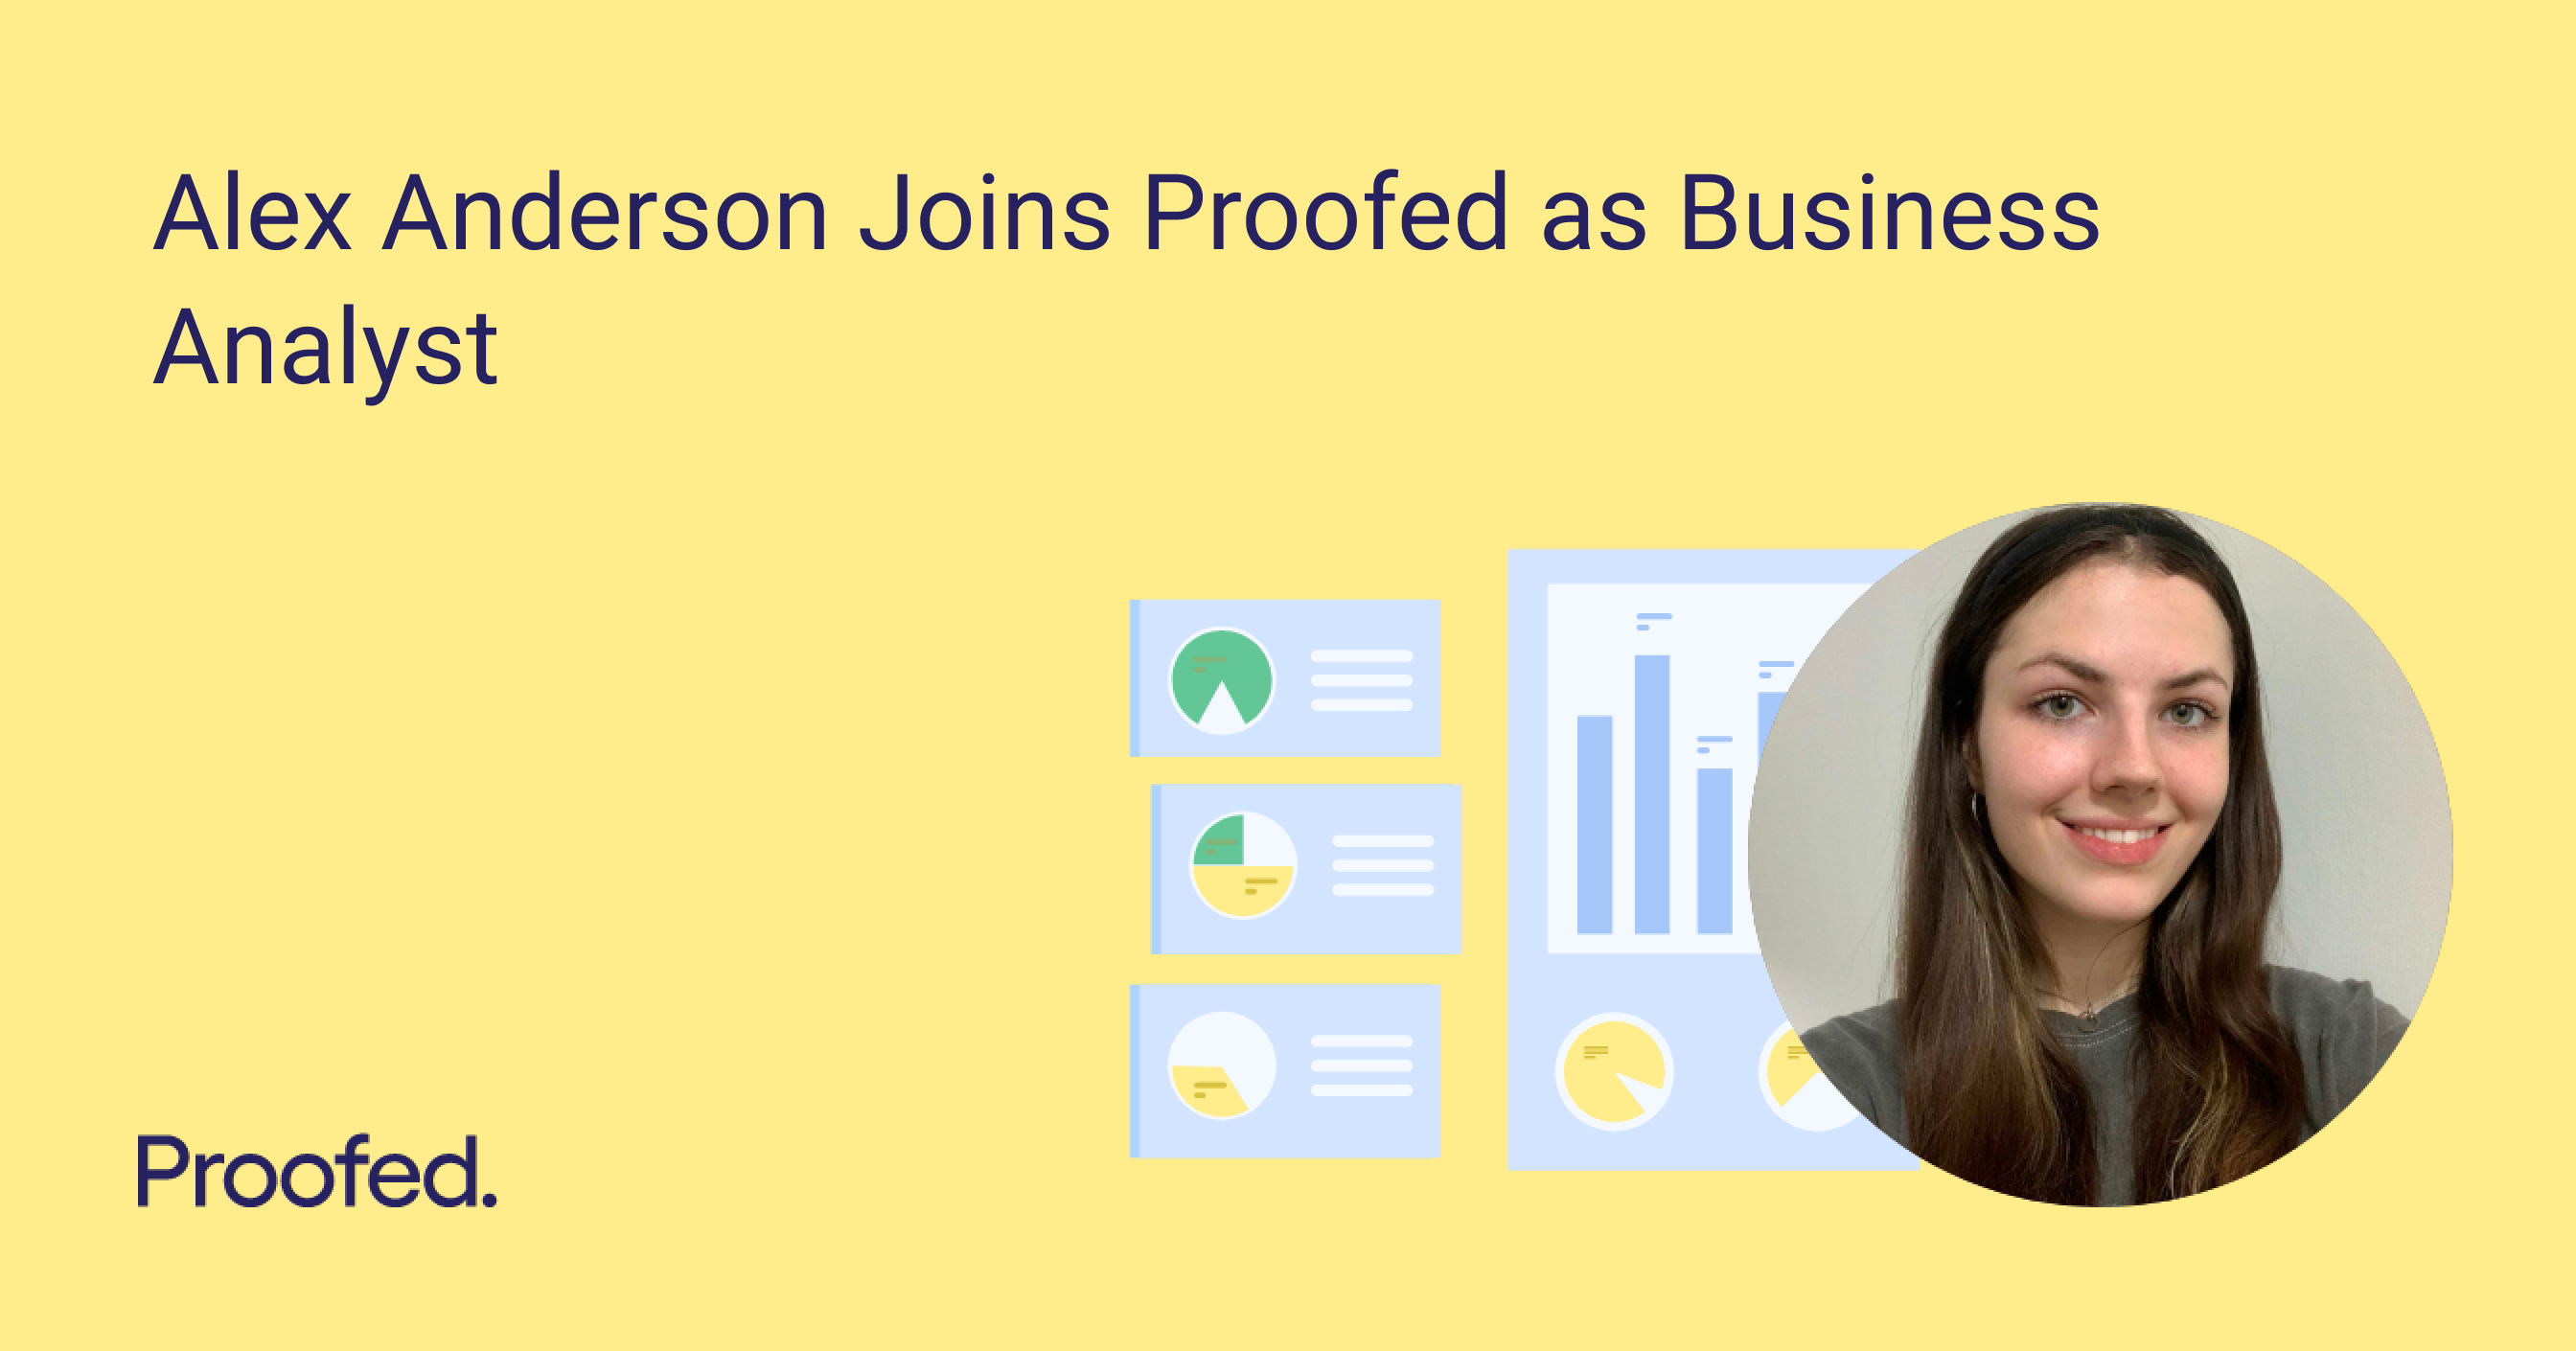 Alex Anderson Joins Proofed as Business Analyst